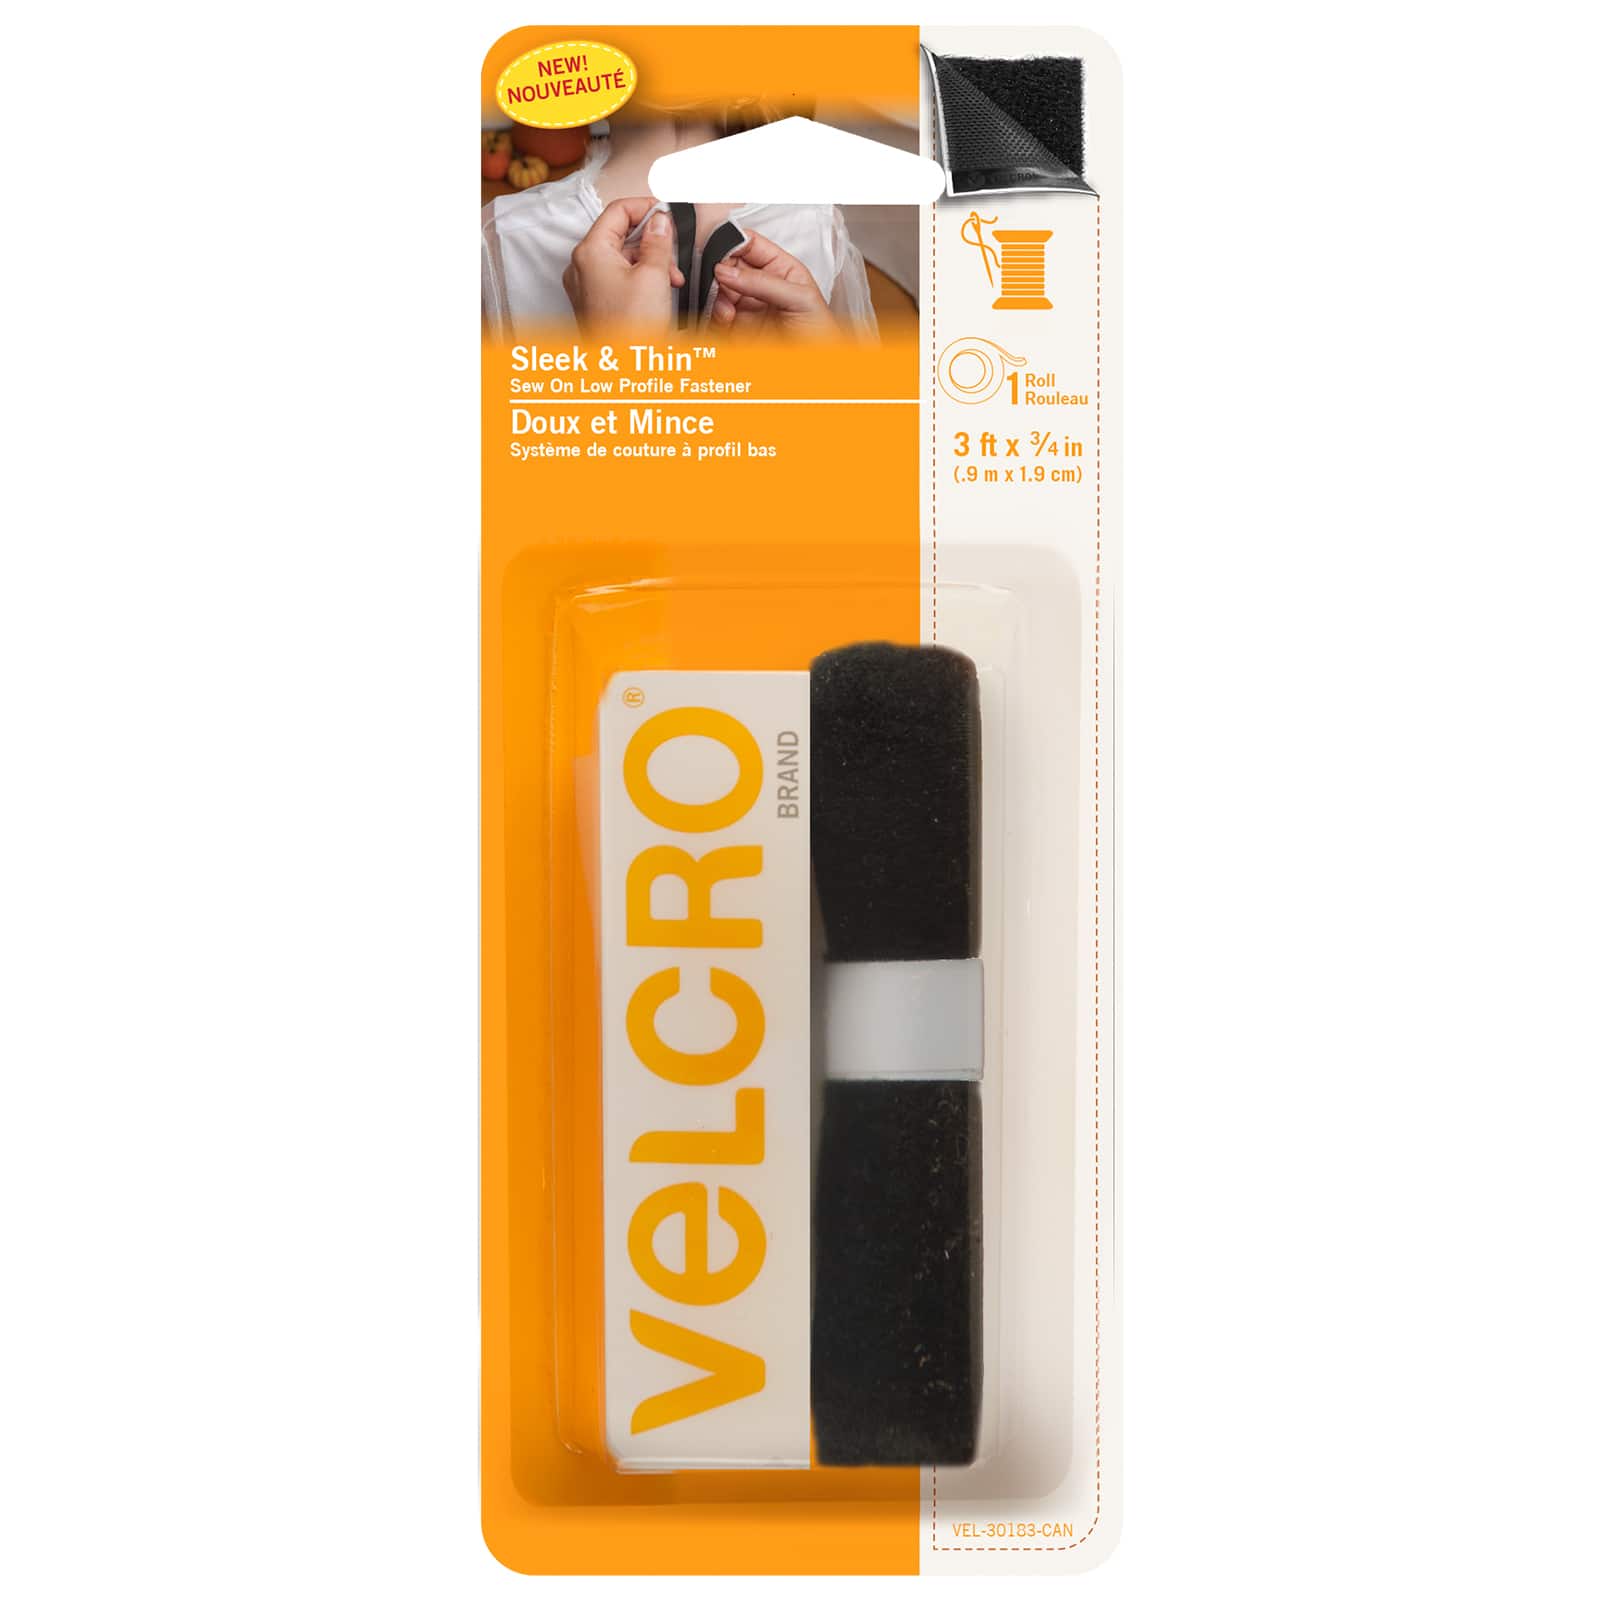 VELCRO Brand For Fabrics Sew On Fabric Tape, No Ironing or Gluing 30in x  5/8in Roll Black